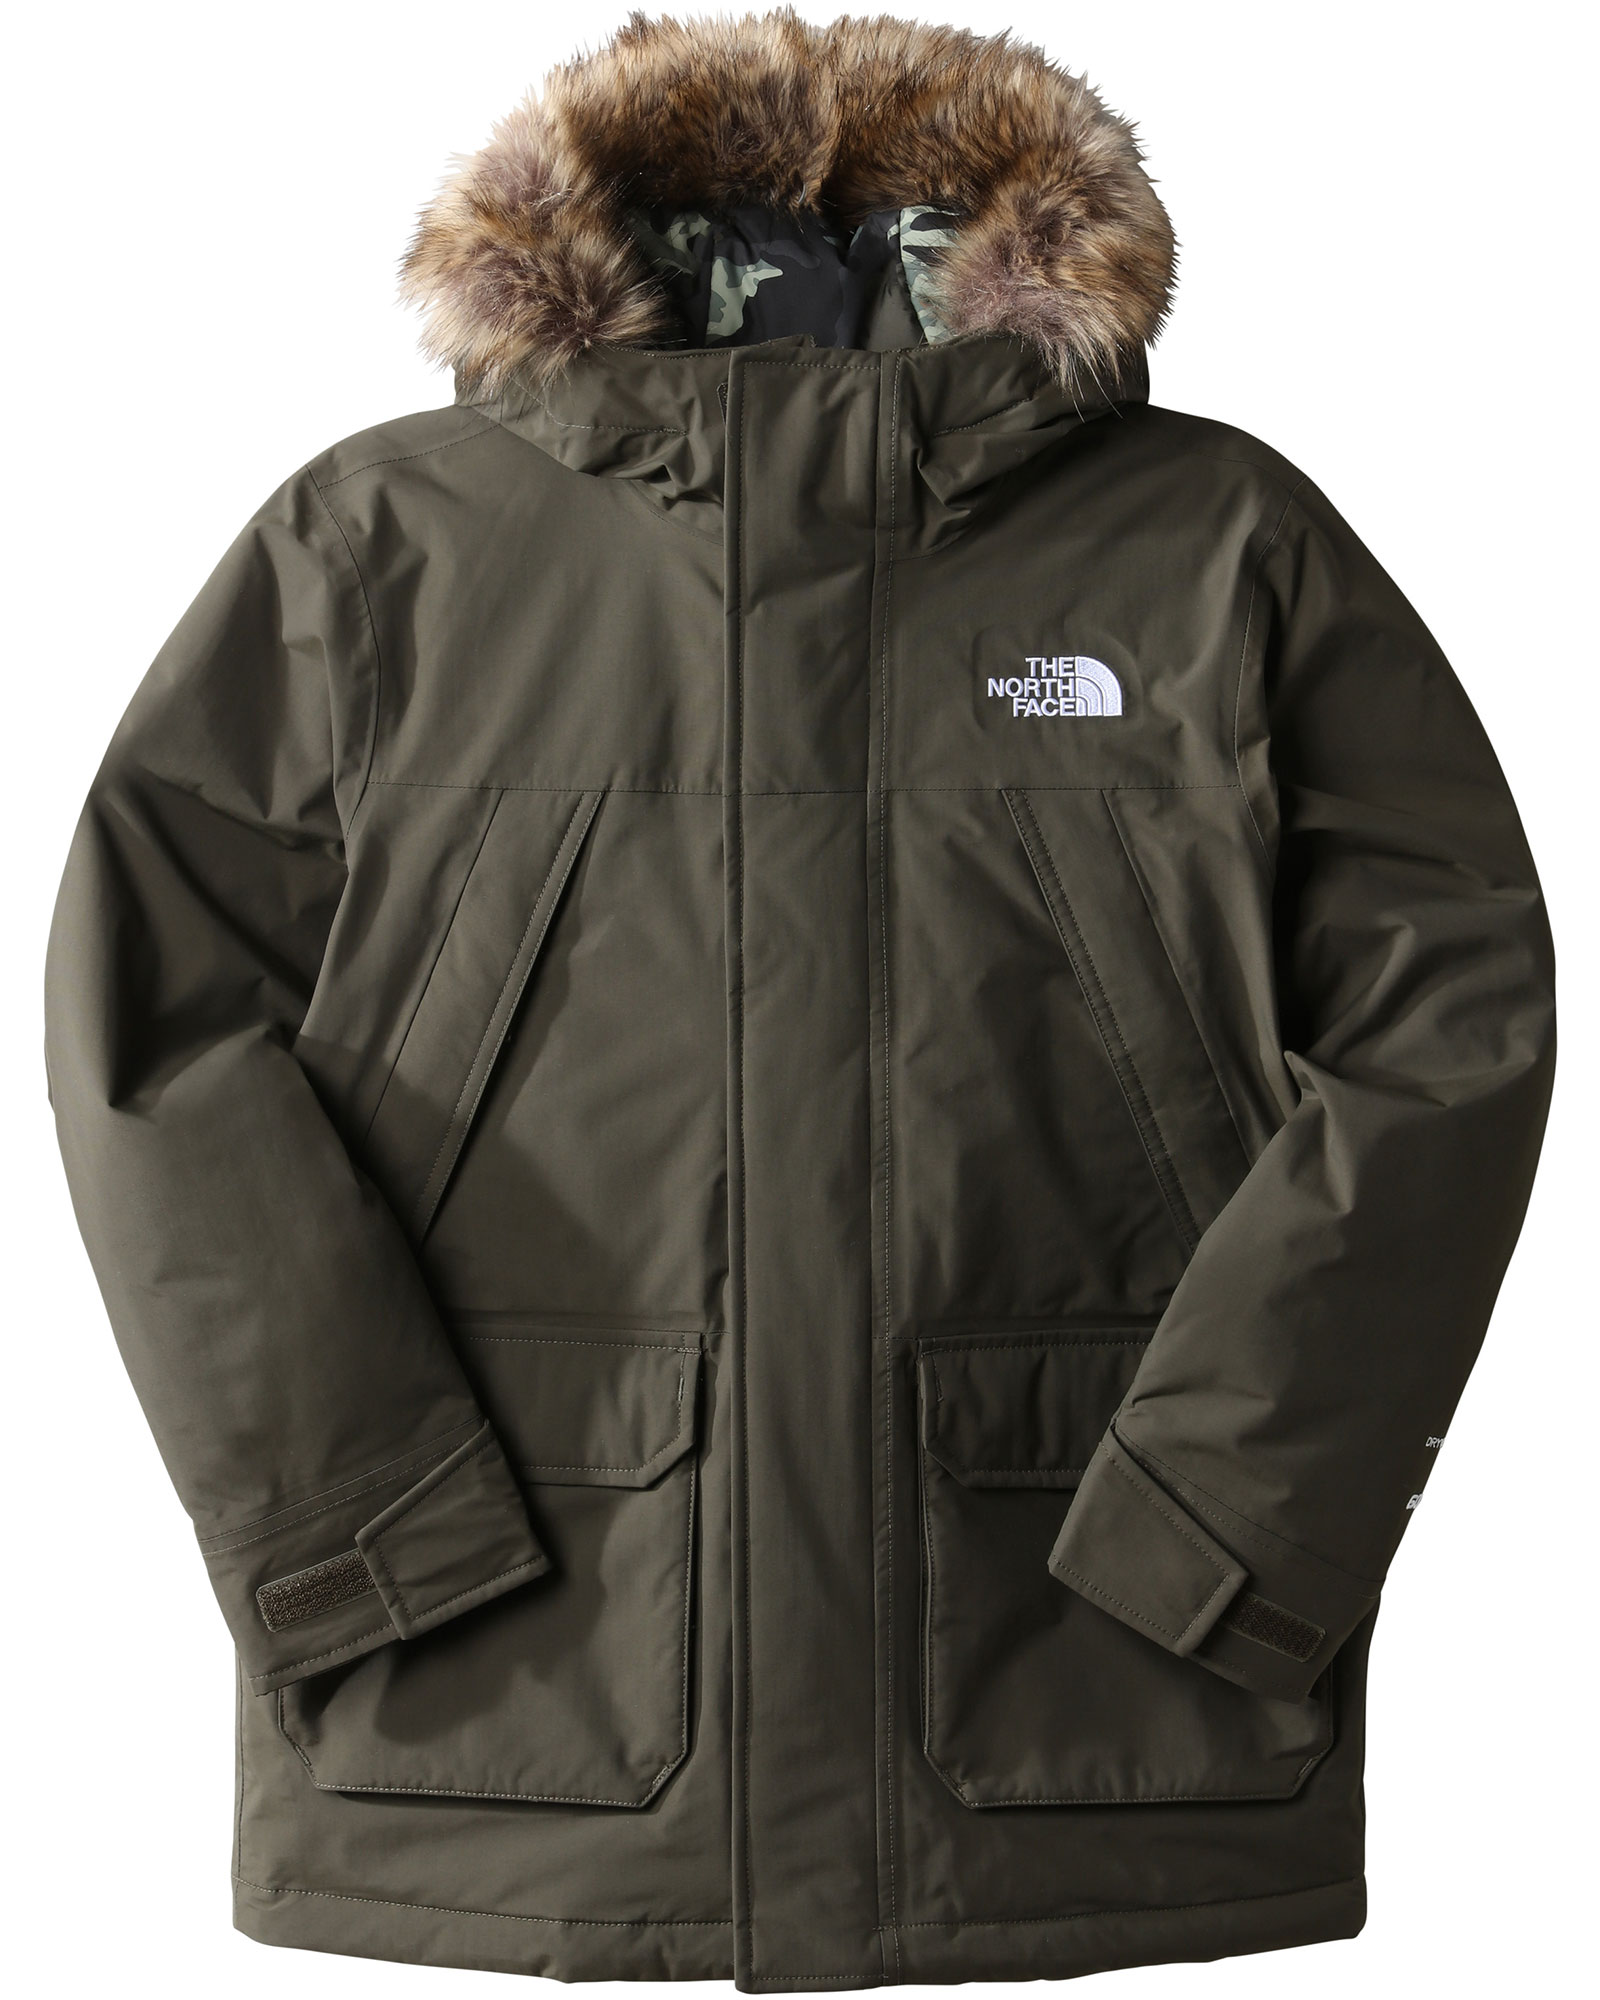 The North Face McMurdo Kids’ Parka Jacket - New Taupe Green M